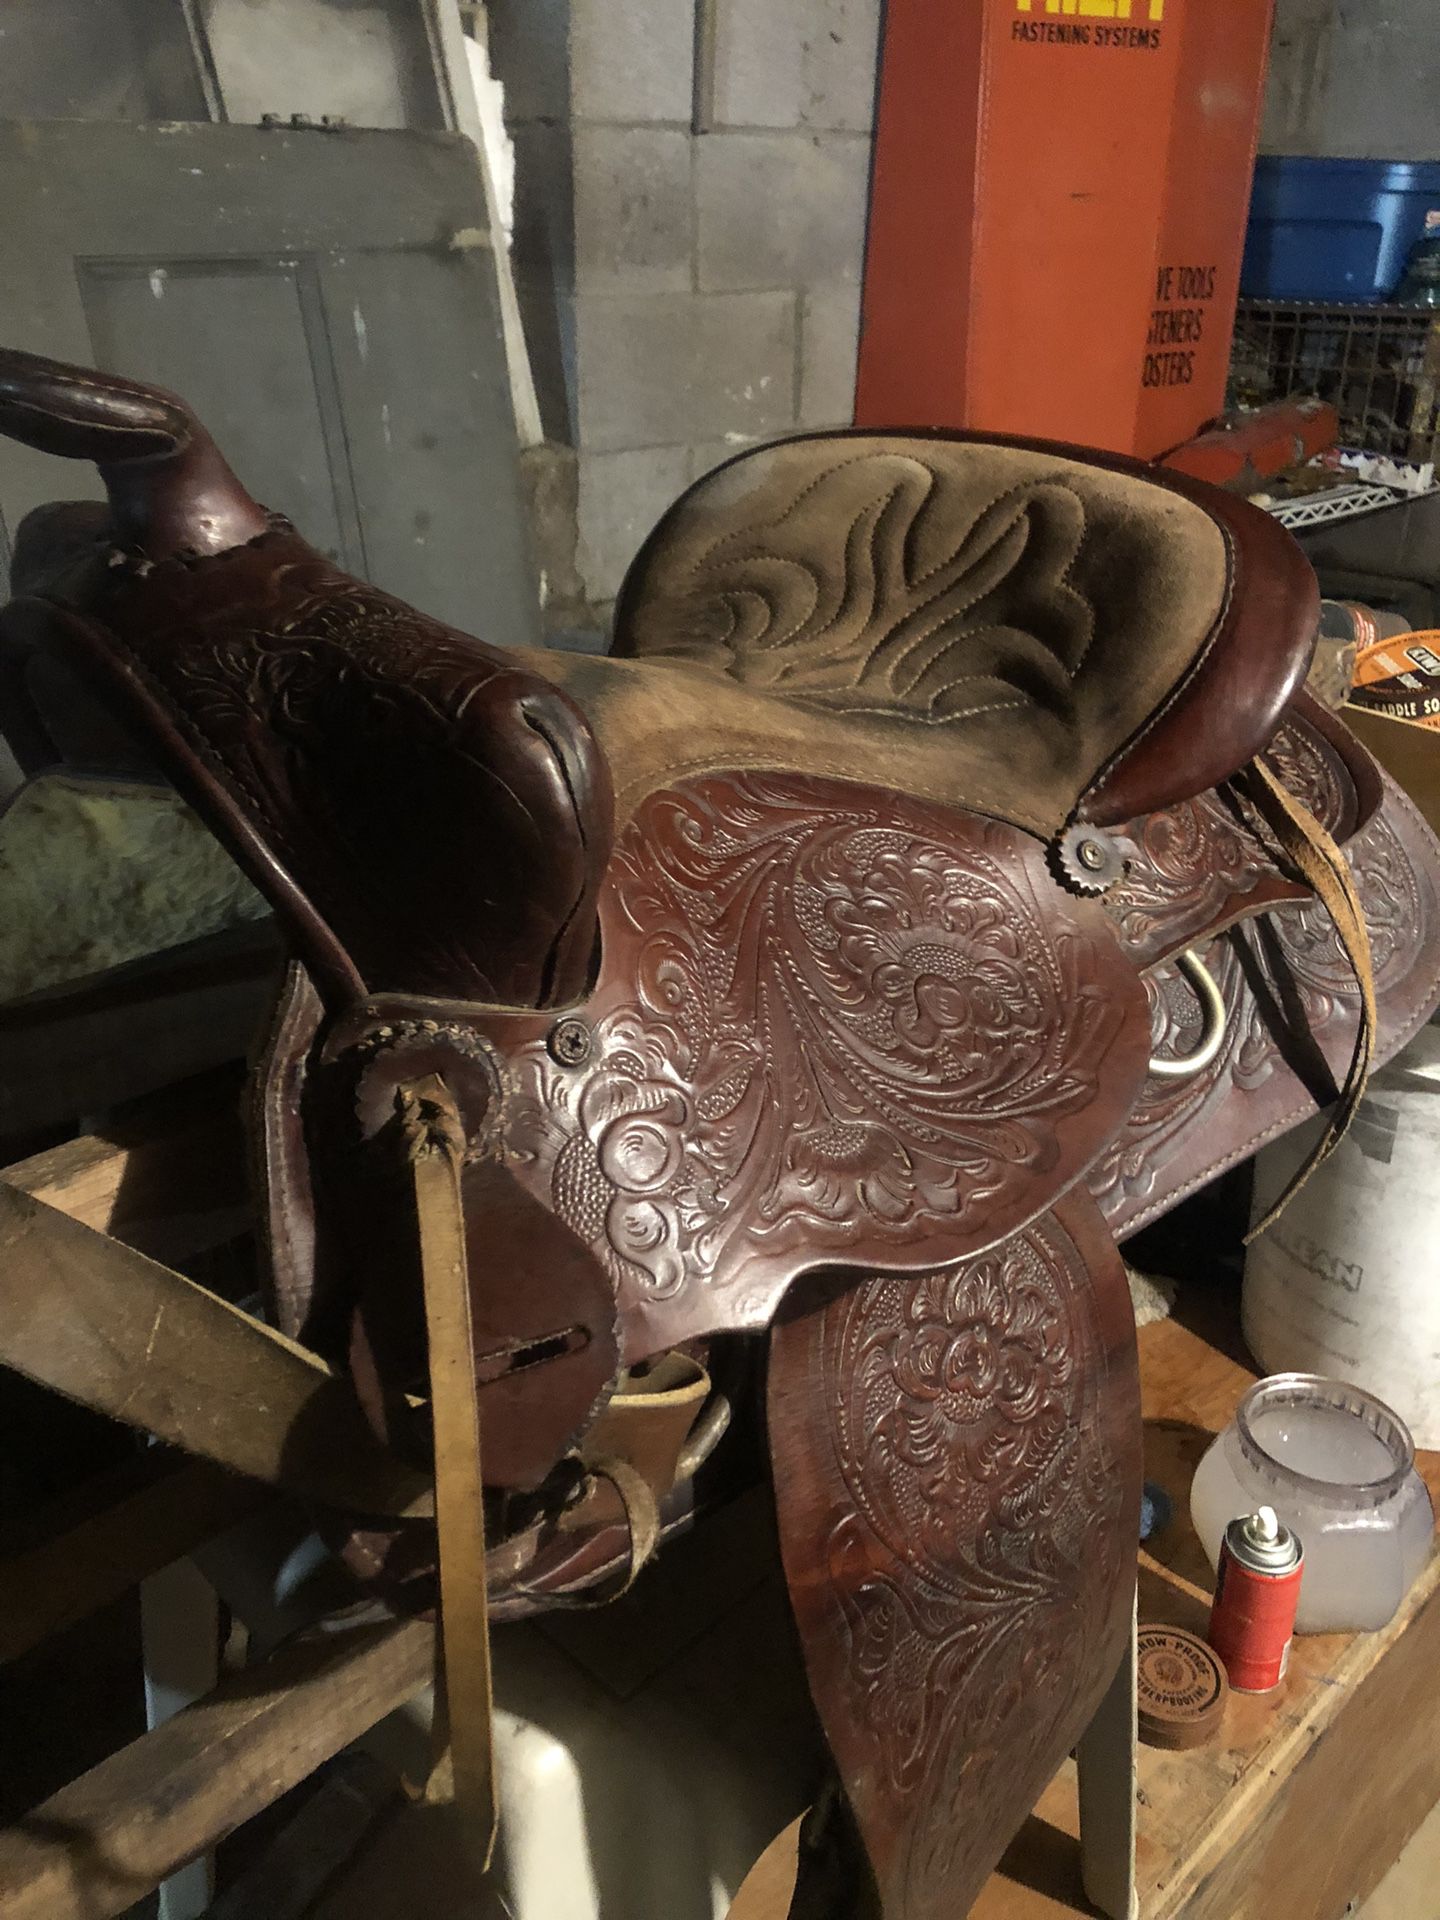 Another really nice saddle that I have